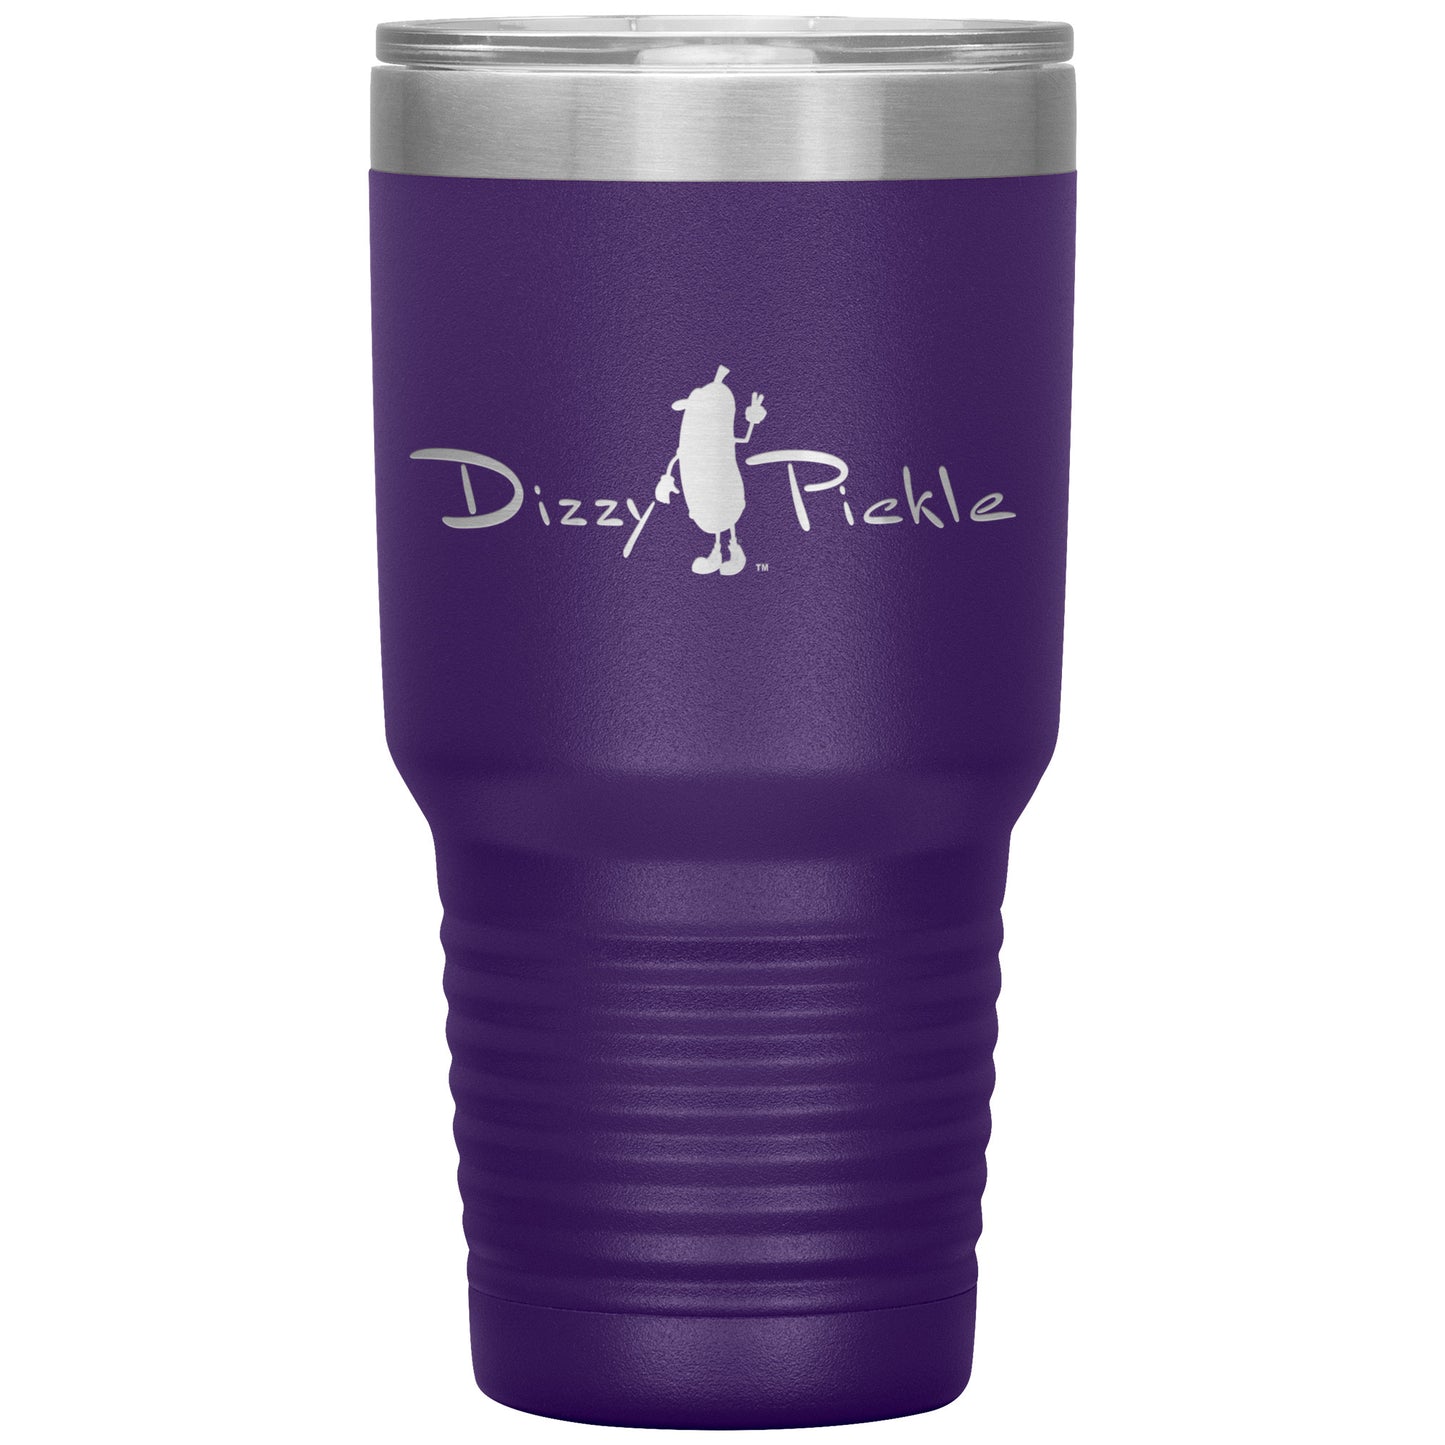 DZY P Classic - 30oz Insulated Tumbler by Dizzy Pickle